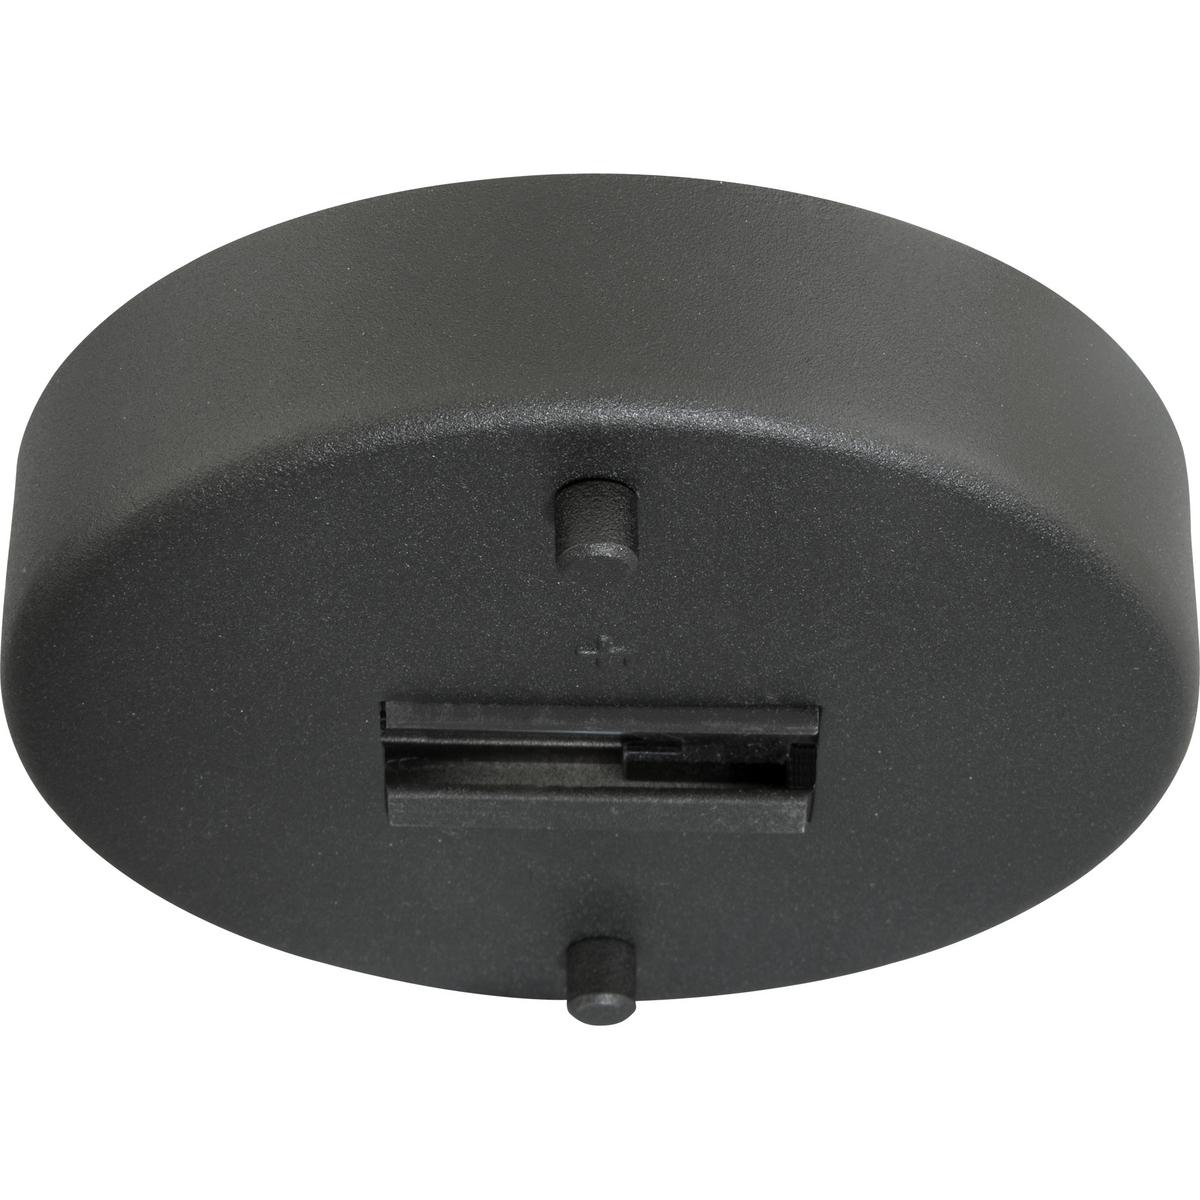 Hubbell P8734-31 Monopoint. Mounts any lampholder, not requiring an external transformer, to junction box on ceiling or wall. Black finish.  ; Black finish. ; Does not require an external transformer. ; Mounts any lampholder to junction box on ceiling or wall.